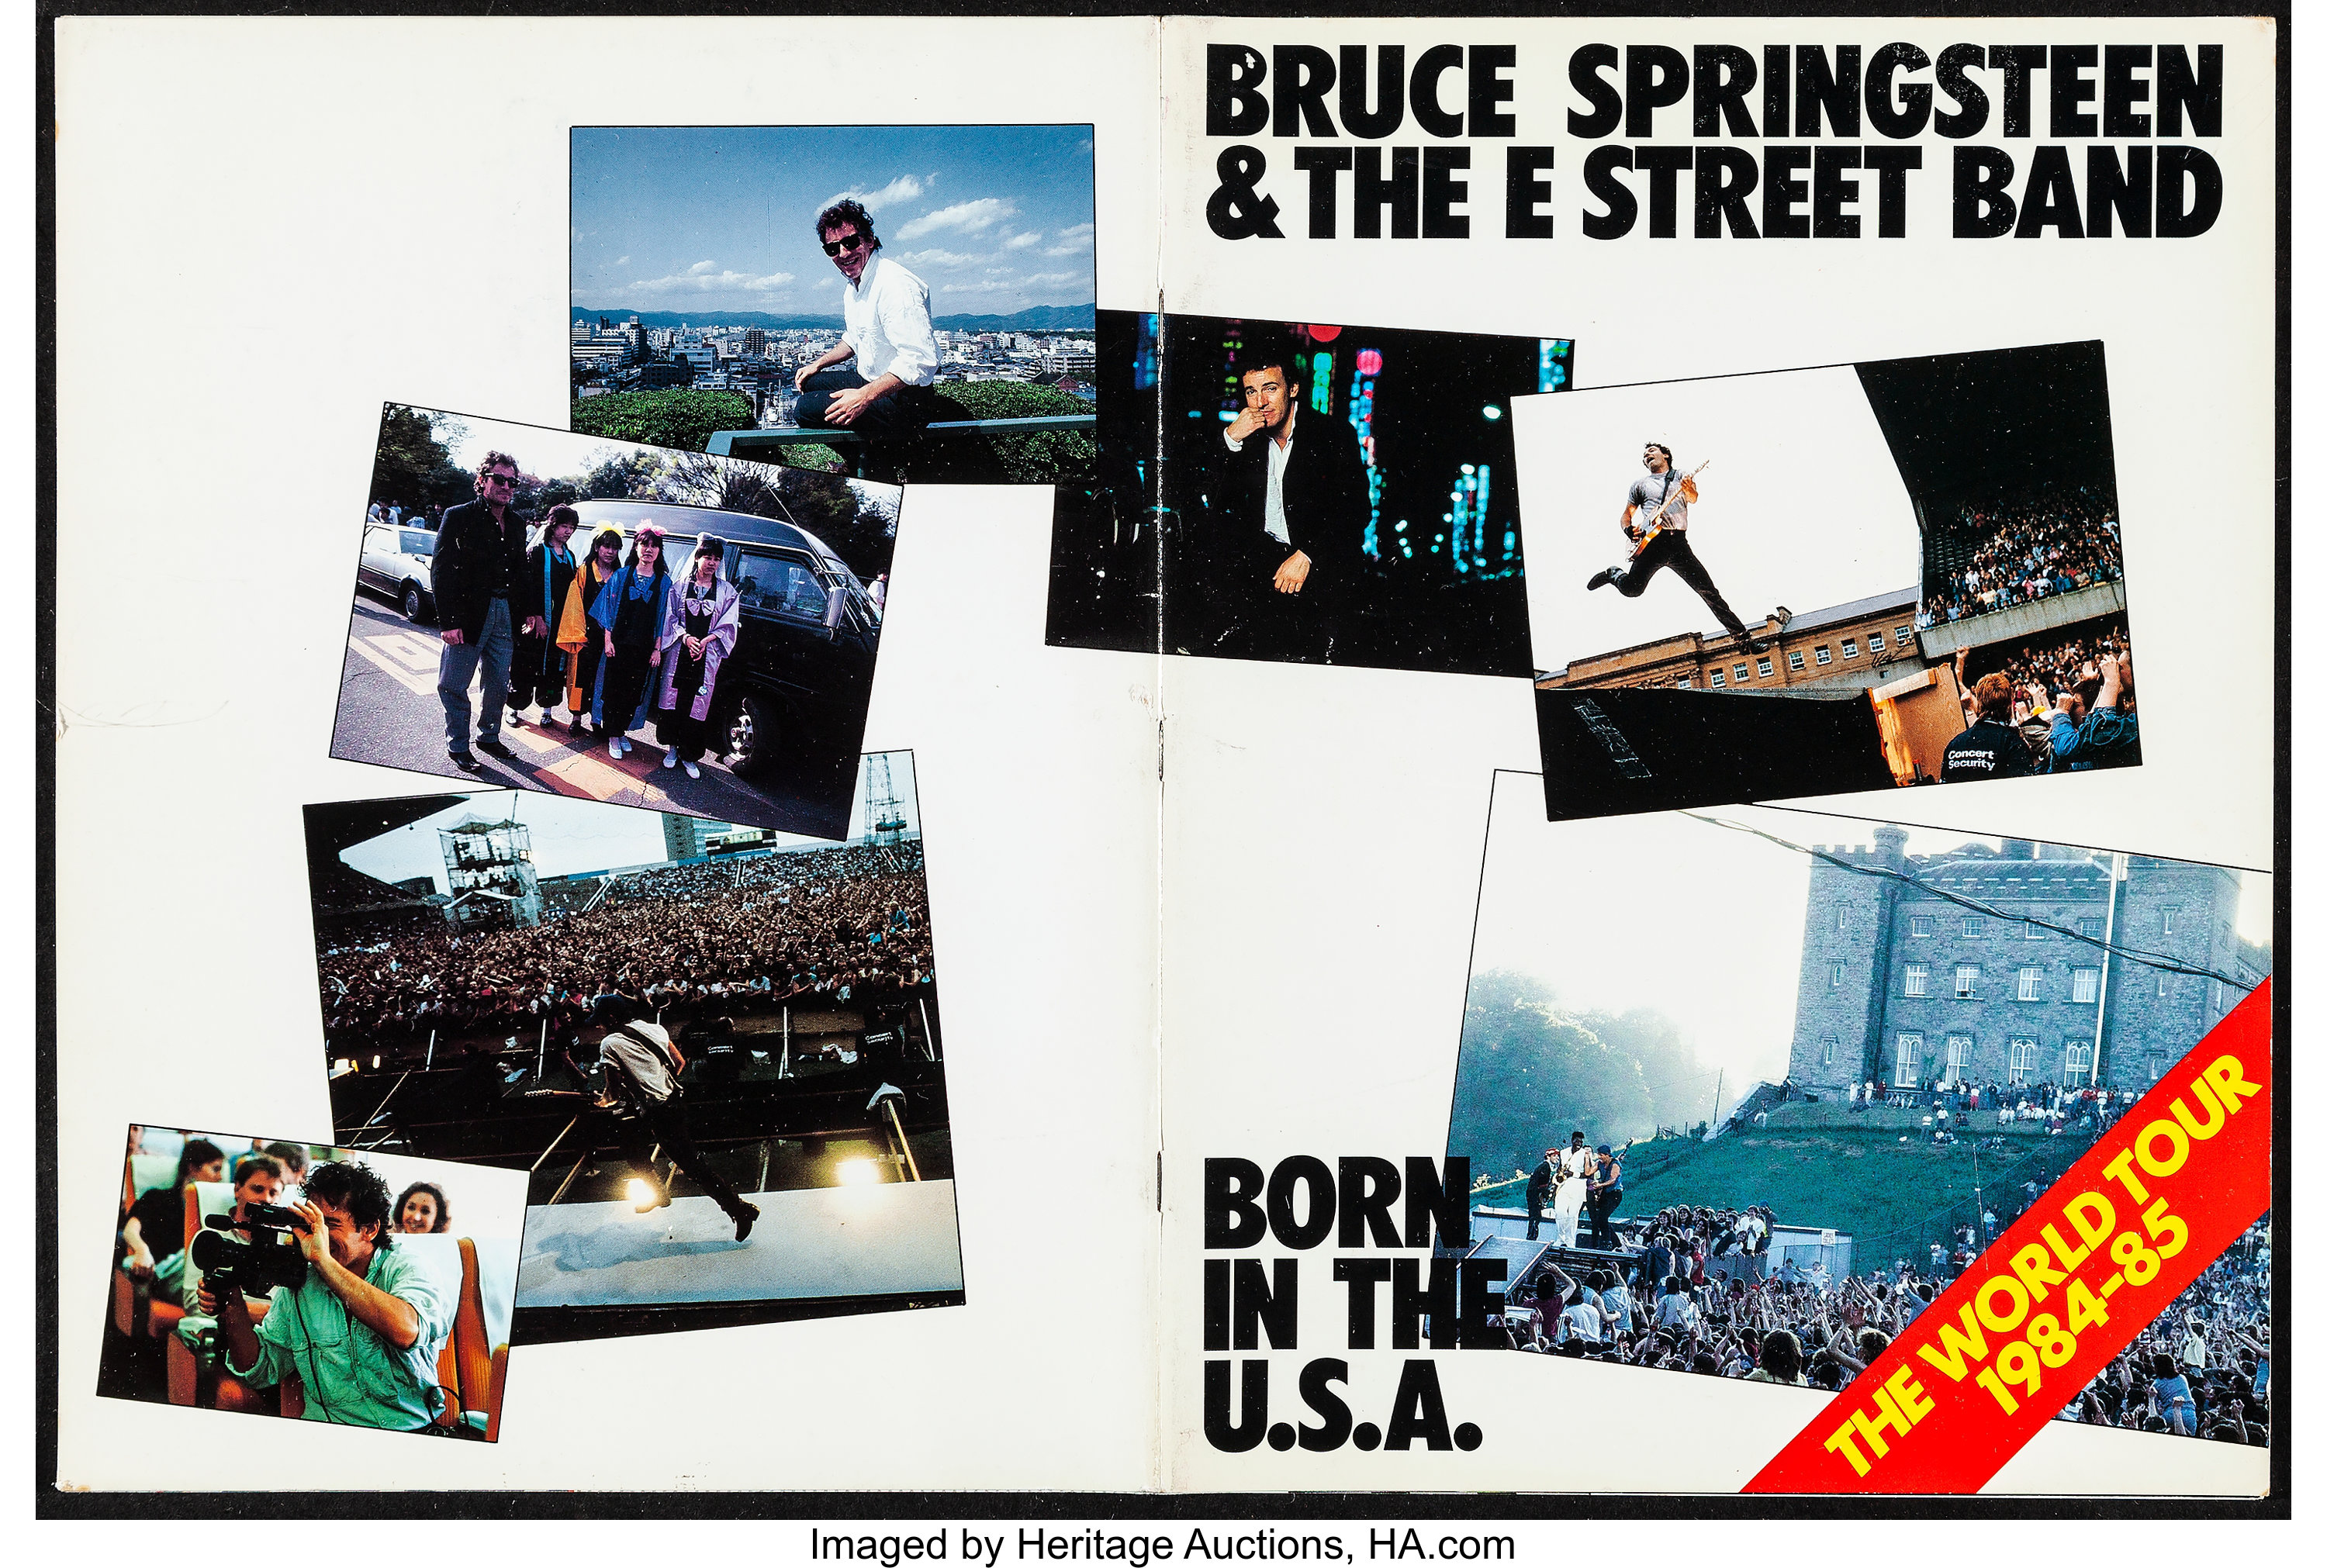 Bruce Springsteen & The E Street Band: Born in the U.S.A. World